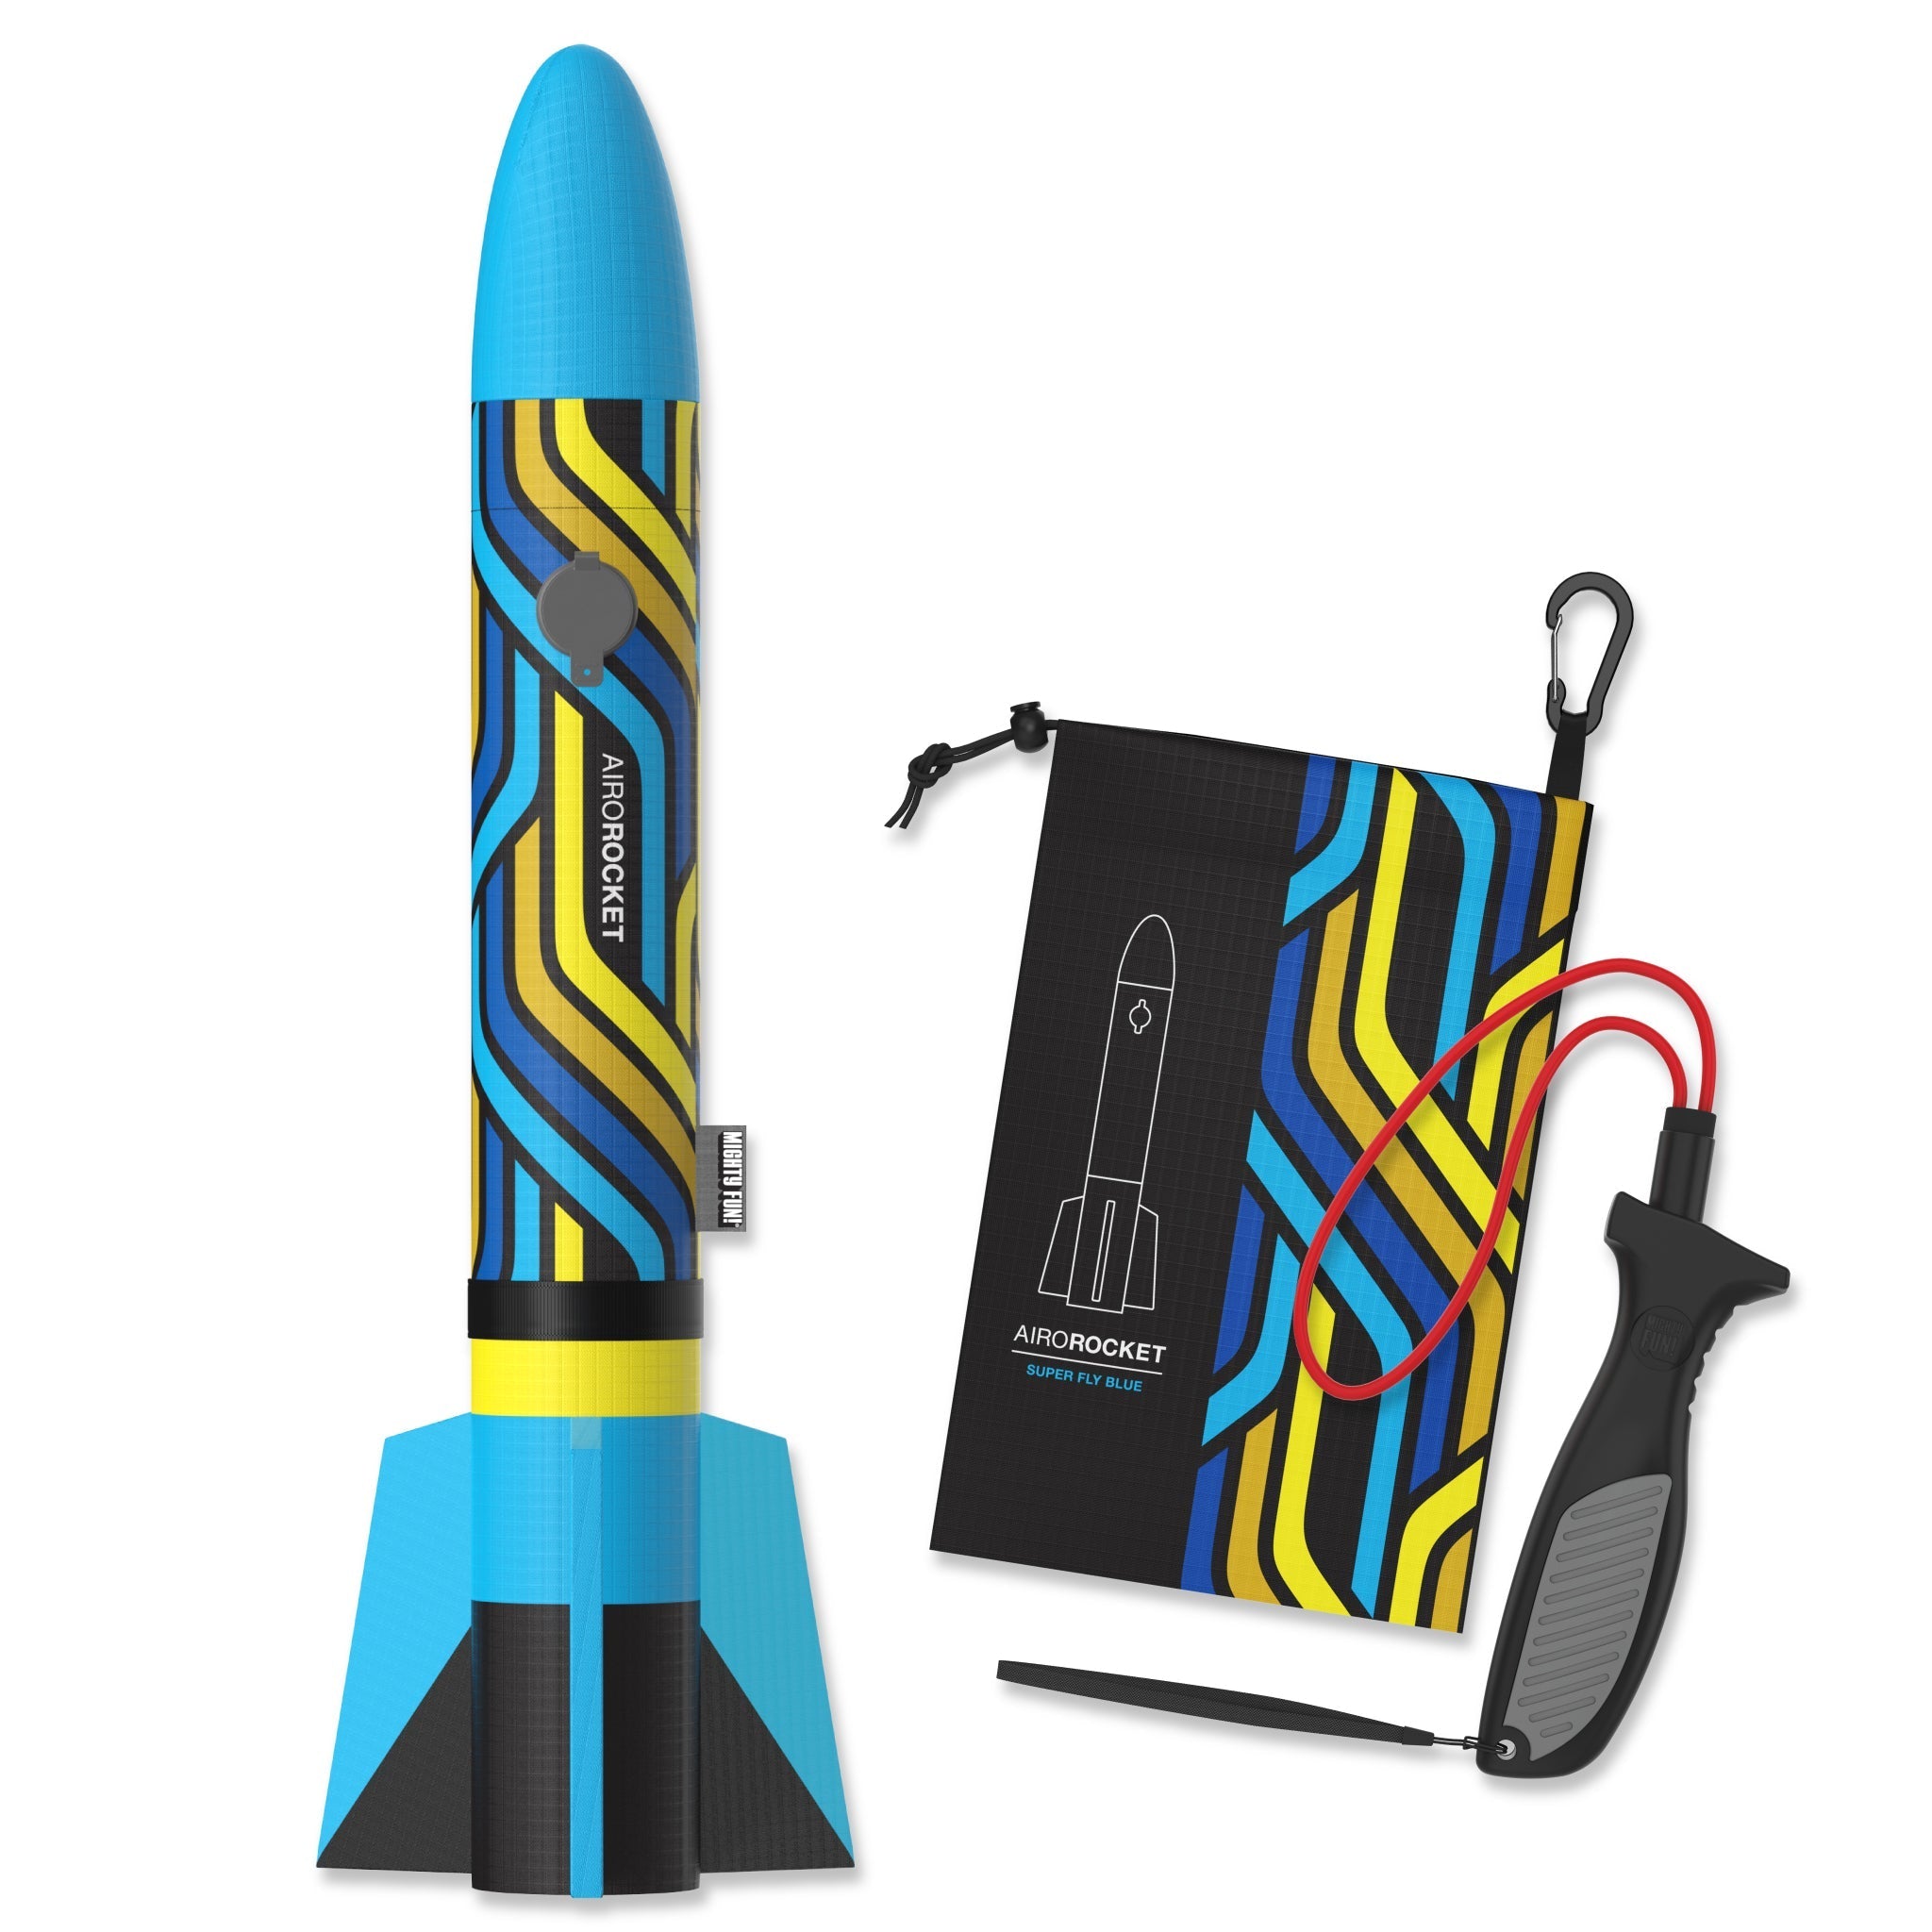 Blue Airo Rocket toy rocket with hand launcher and storage bag by Mighty Fun!